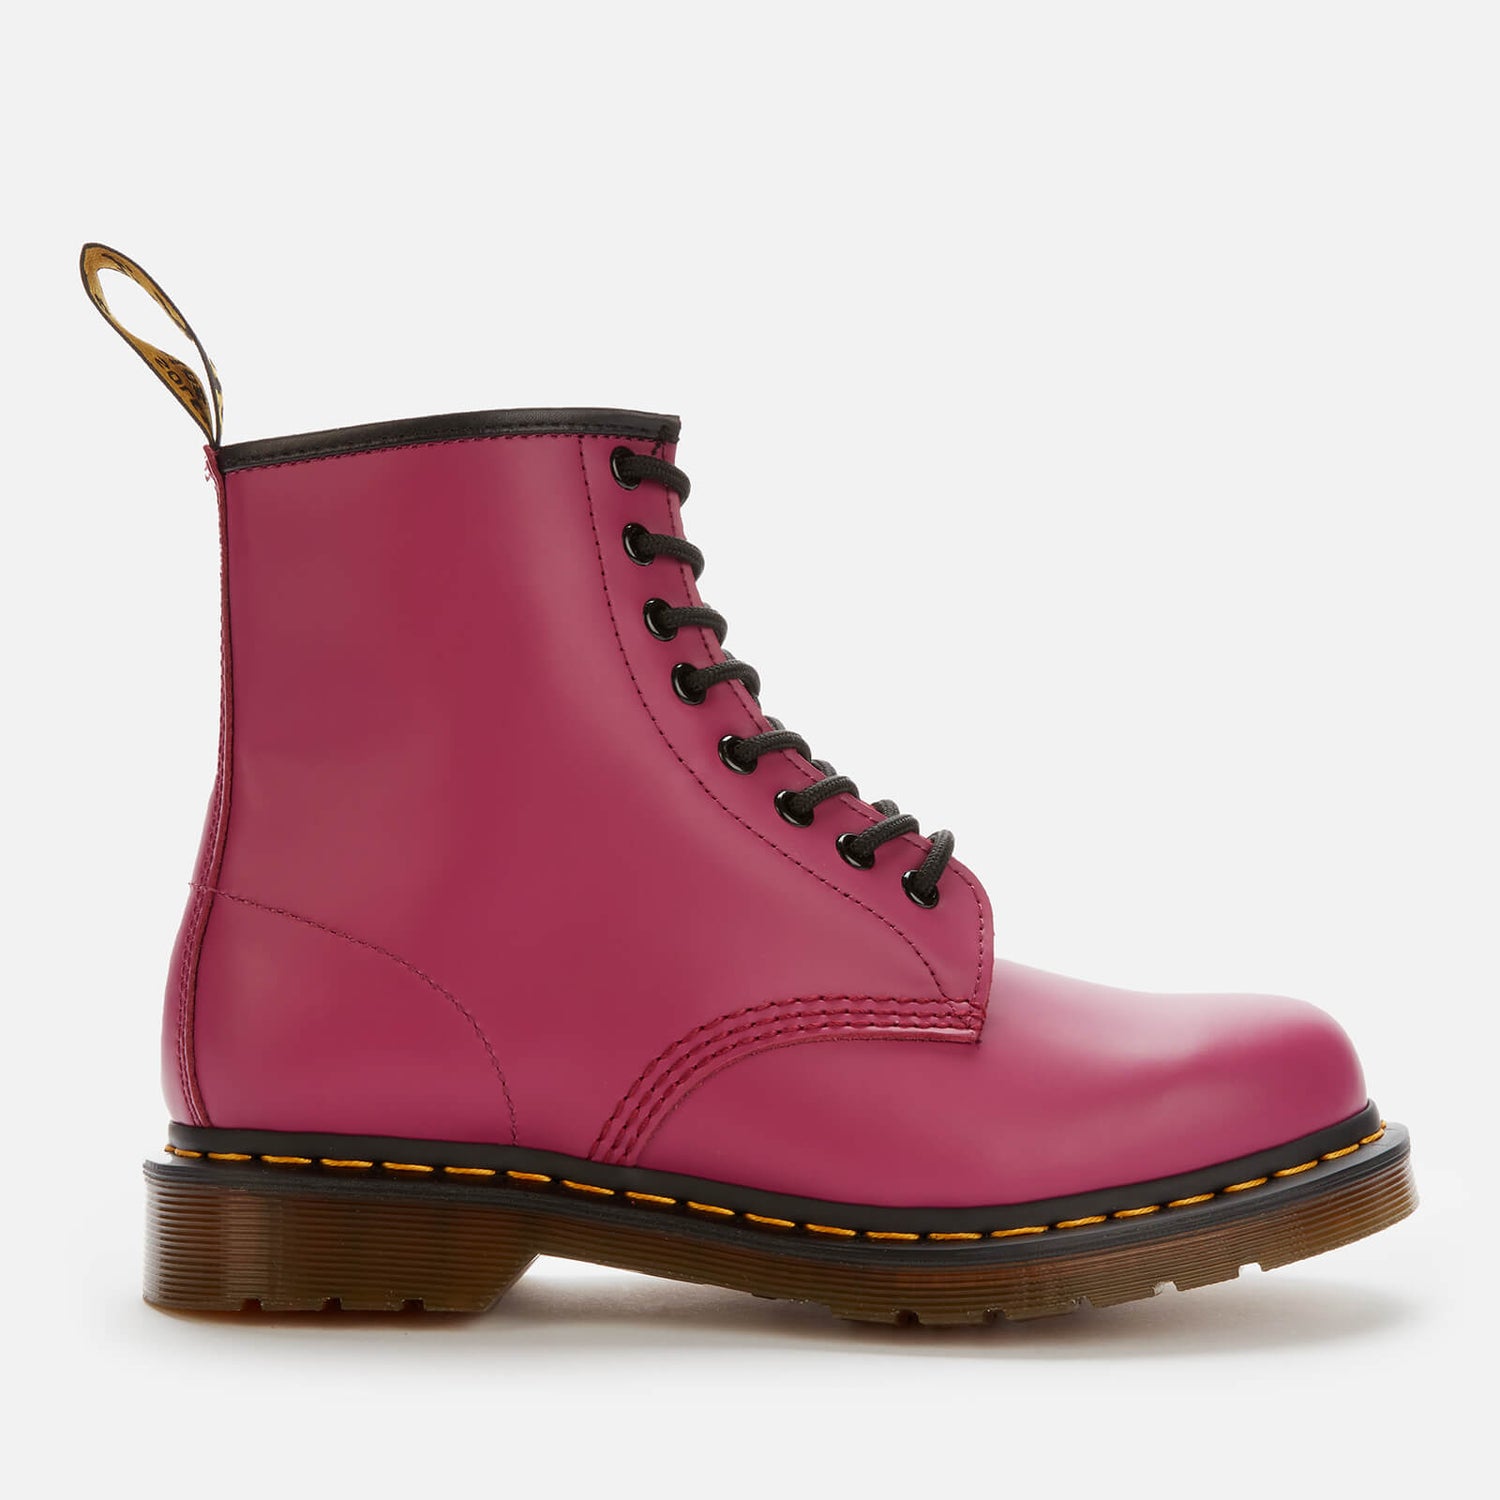 Dr. Martens Women's 1460 Smooth Leather 8-Eye Boots - Fuchsia